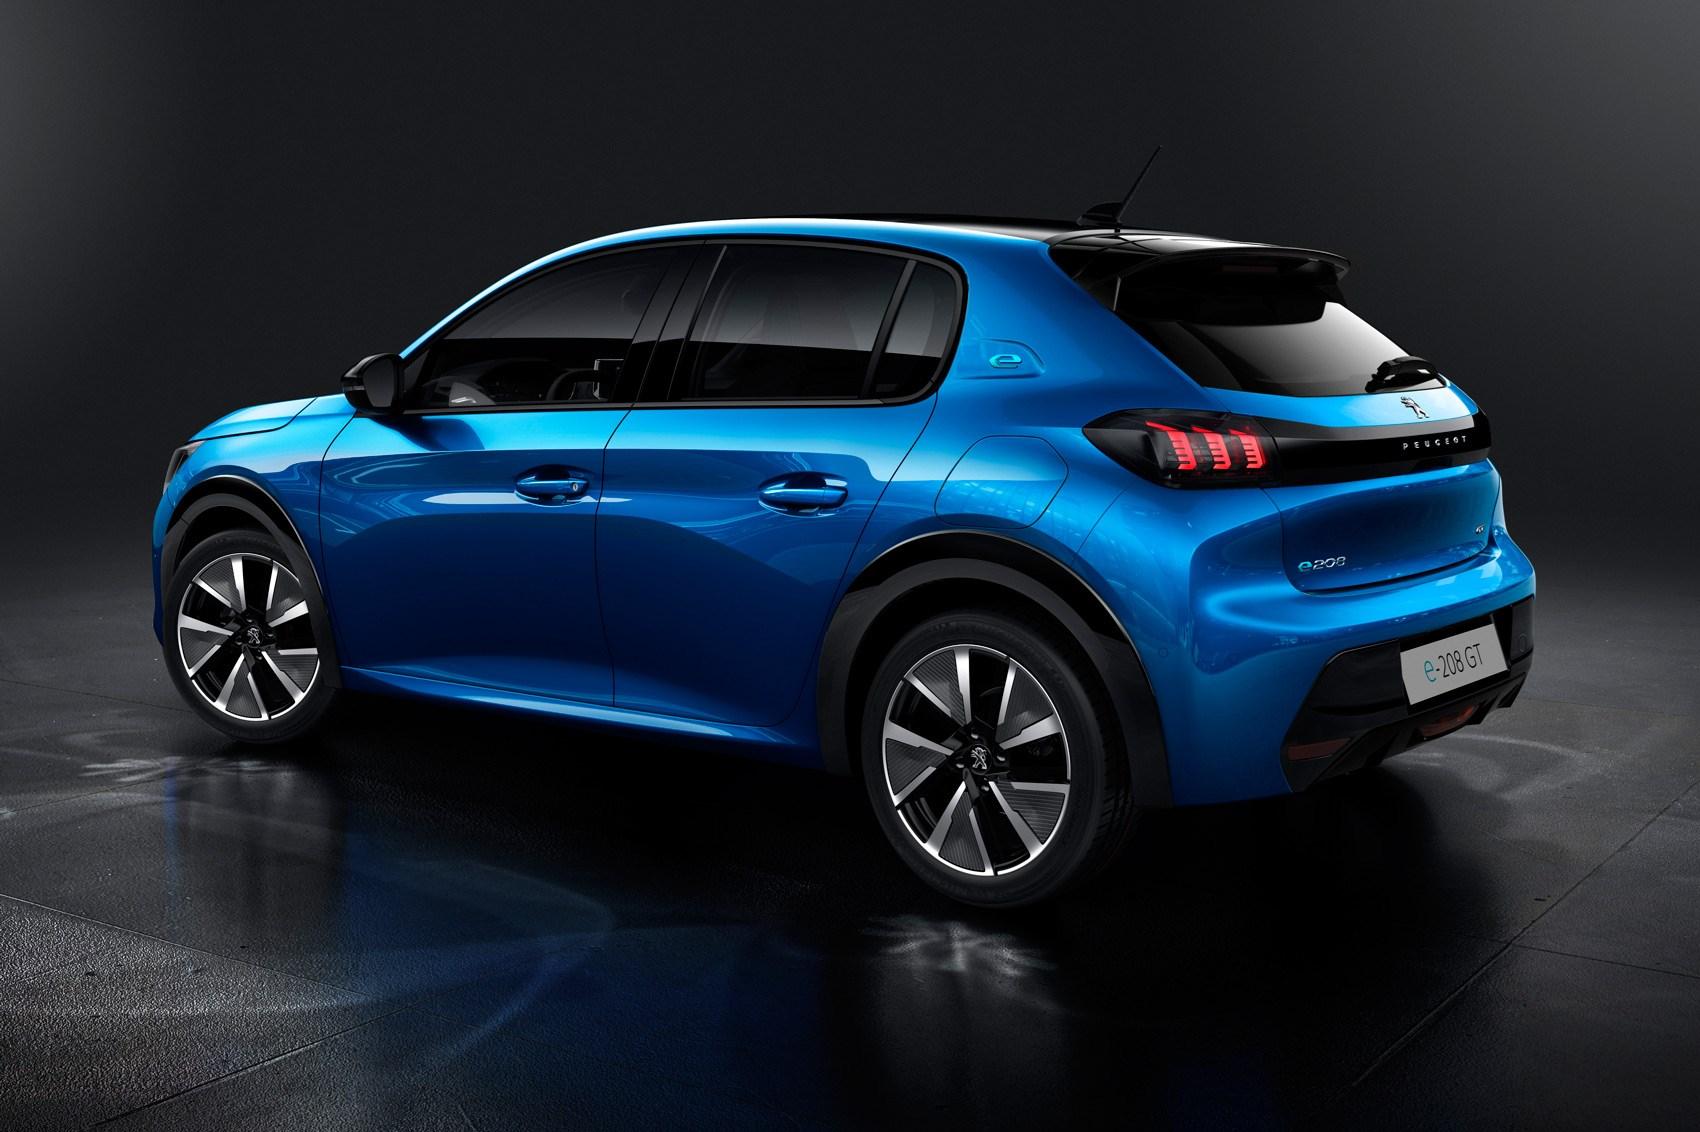 New 2019 Peugeot 208 And E 208: The Full Story